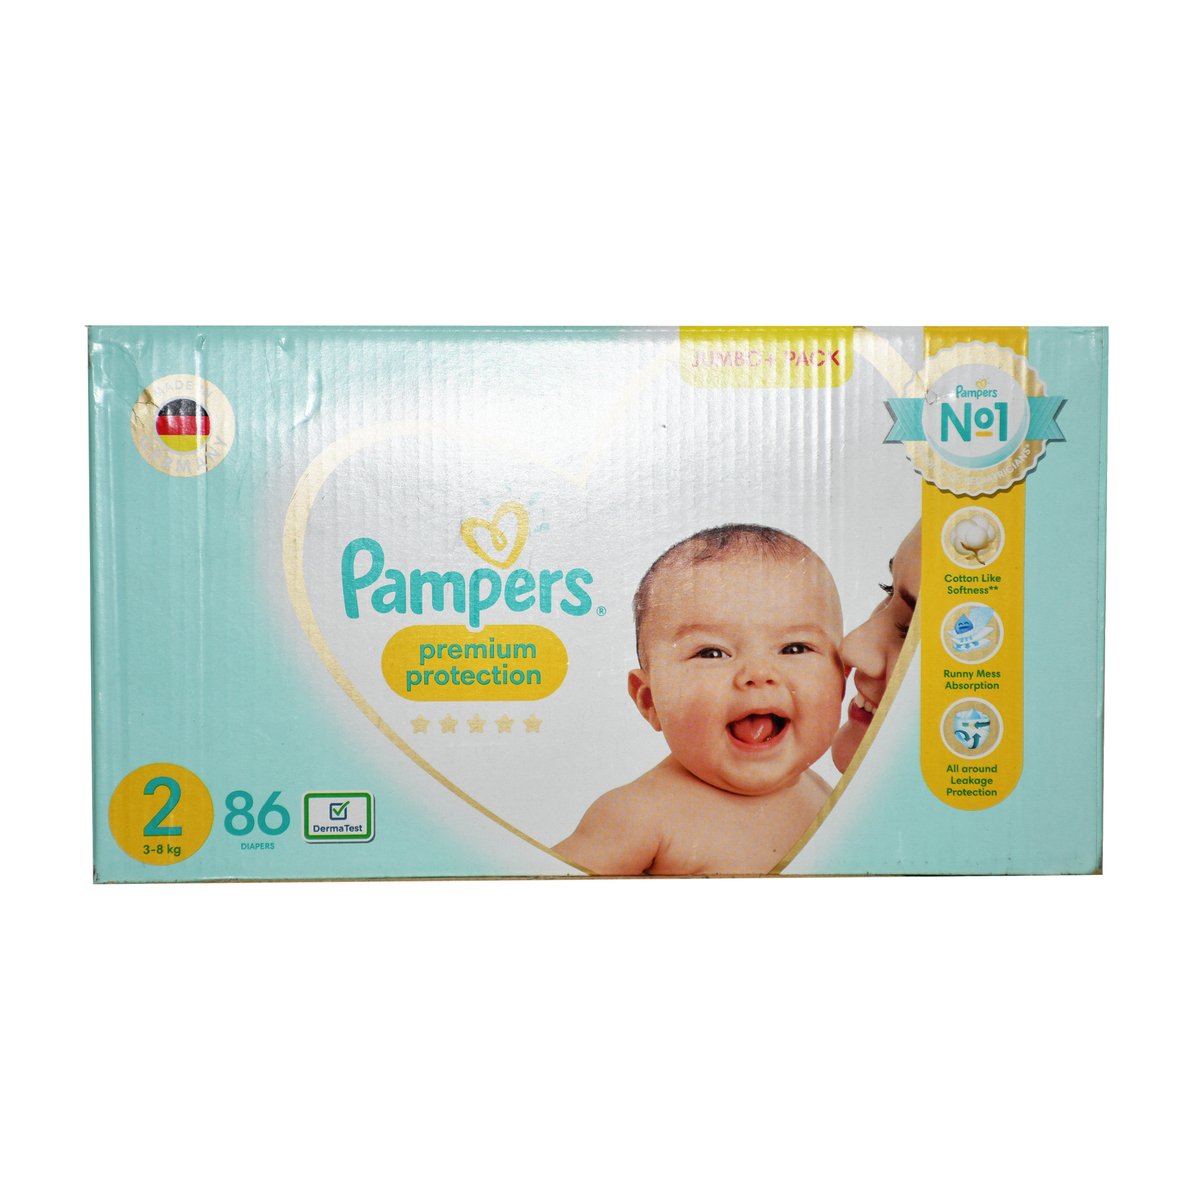 New Dry Express Size Pampers Delivery Price Diapers | at Baby Best Care Box Lulu | Premium 86pcs 2, Online 4-8kg Kuwait